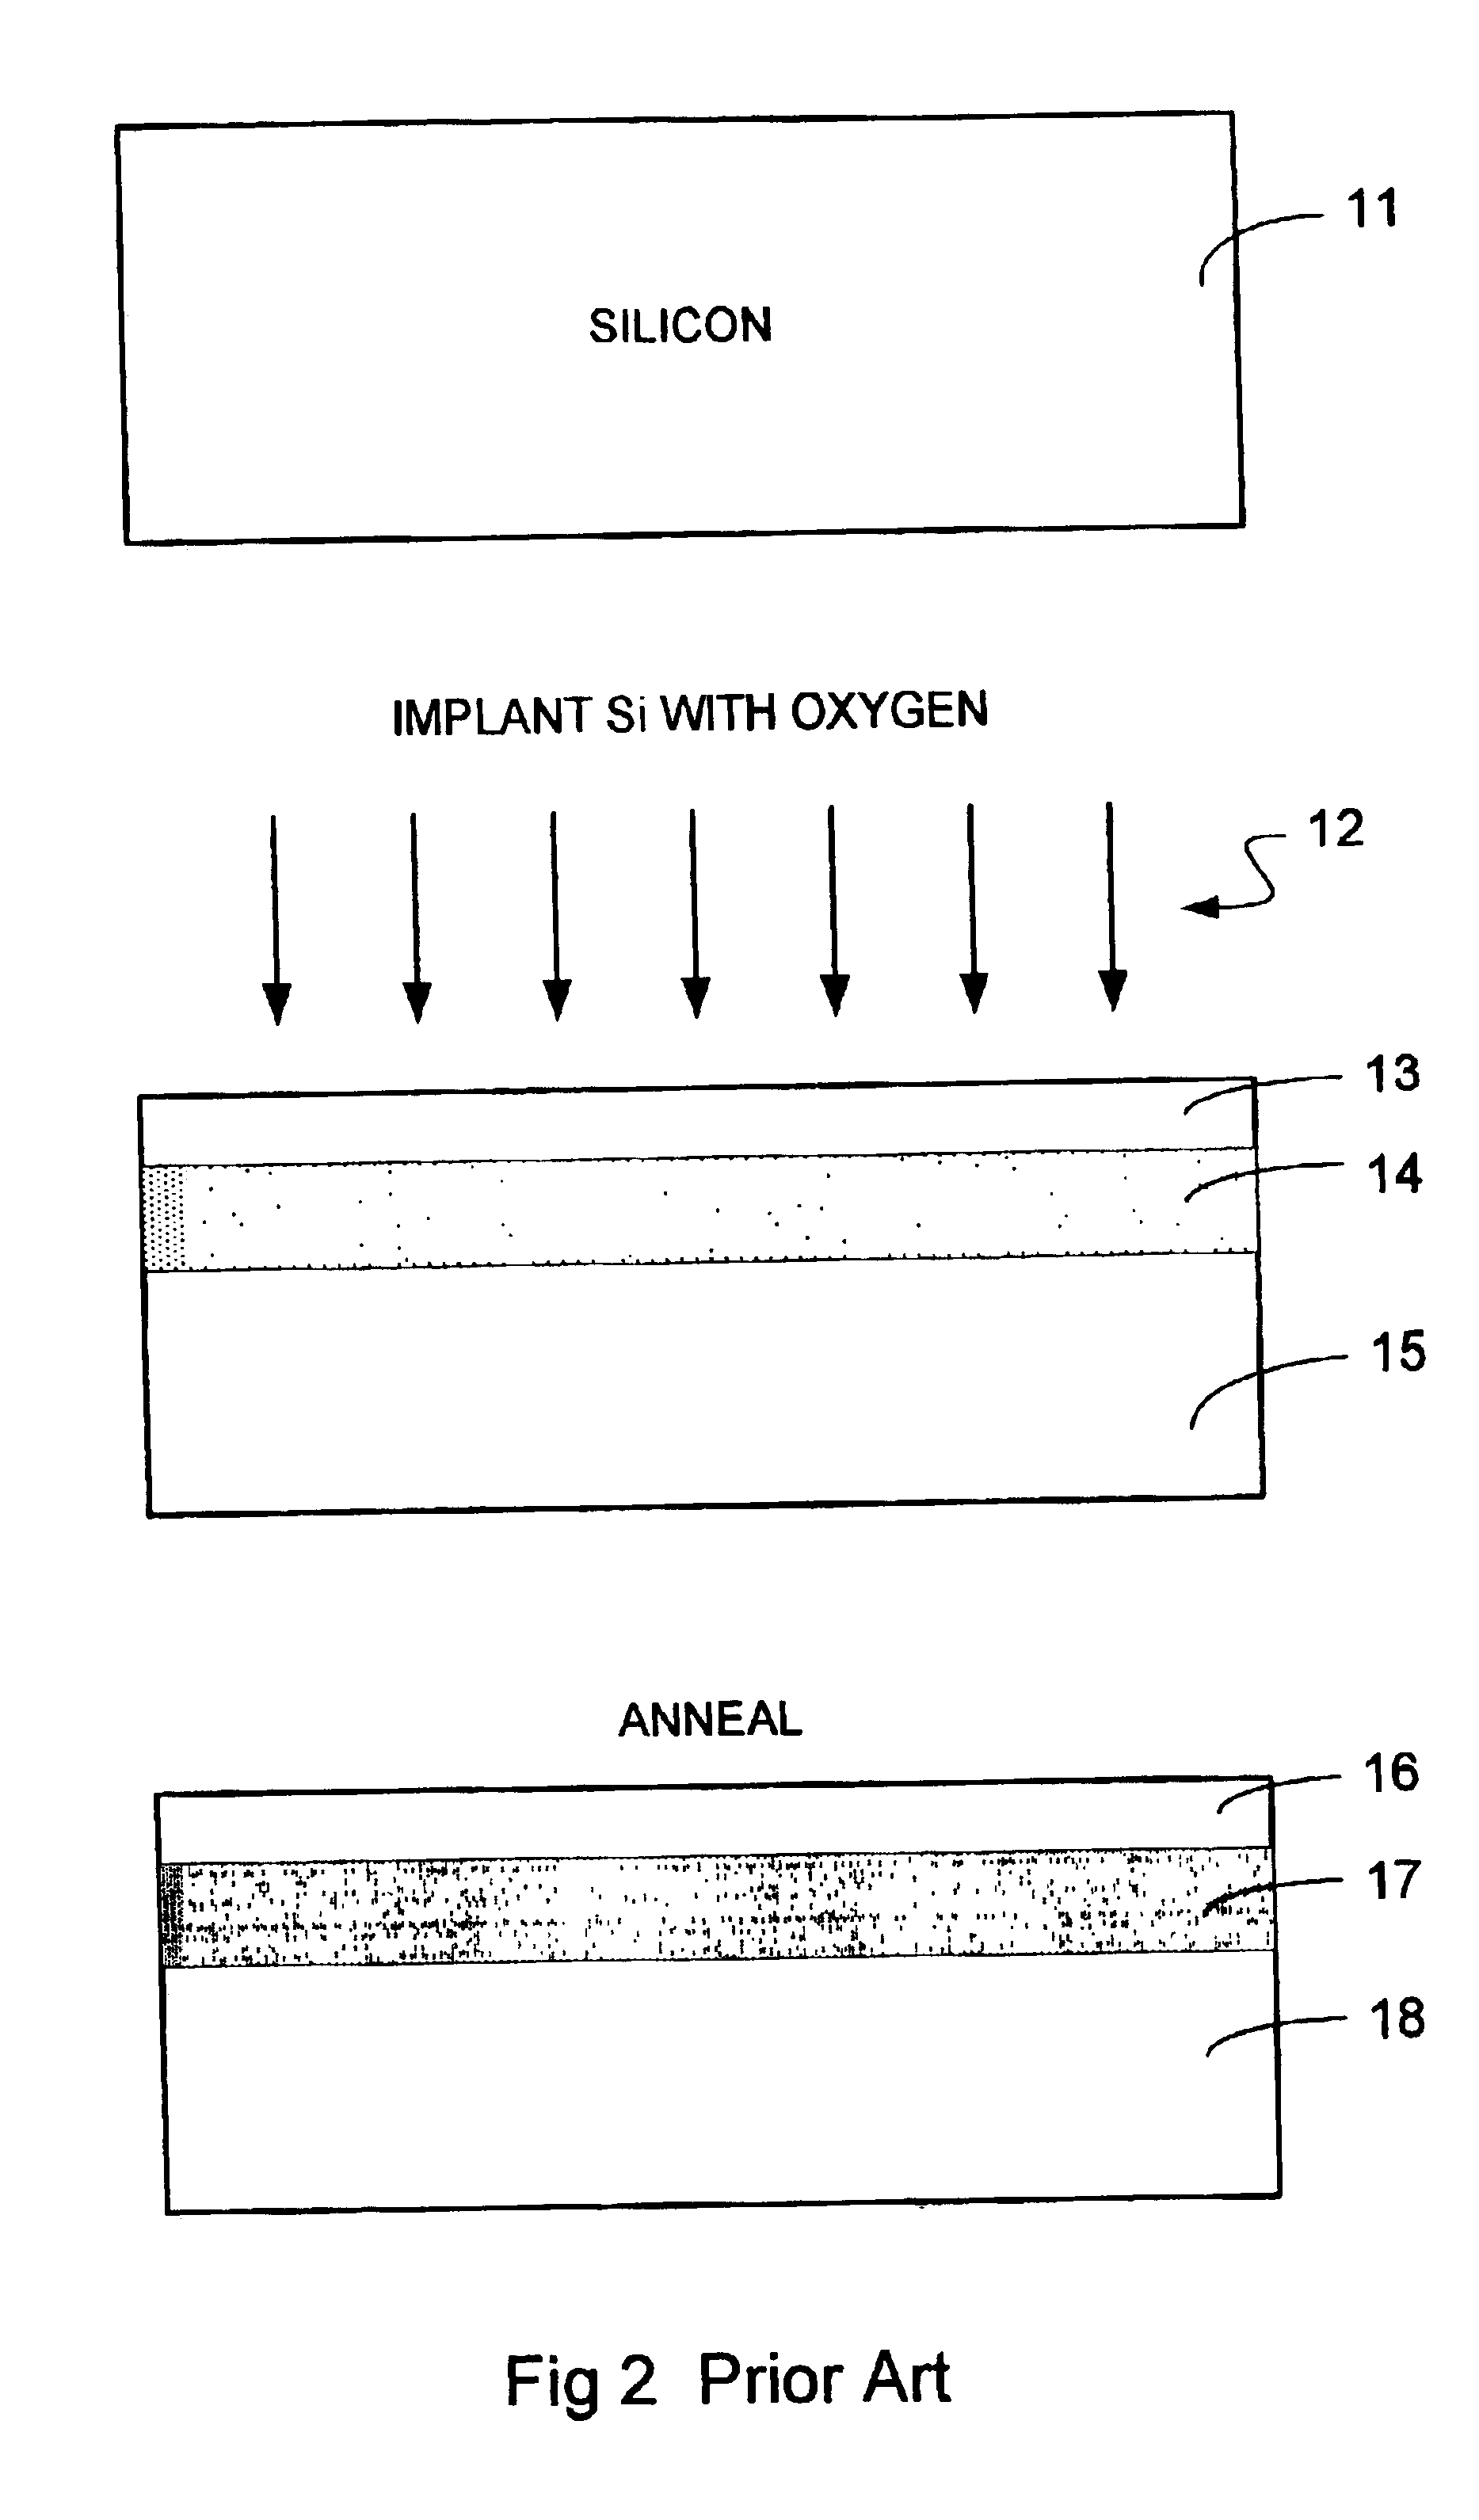 Method and apparatus to make a semiconductor chip susceptible to radiation failure